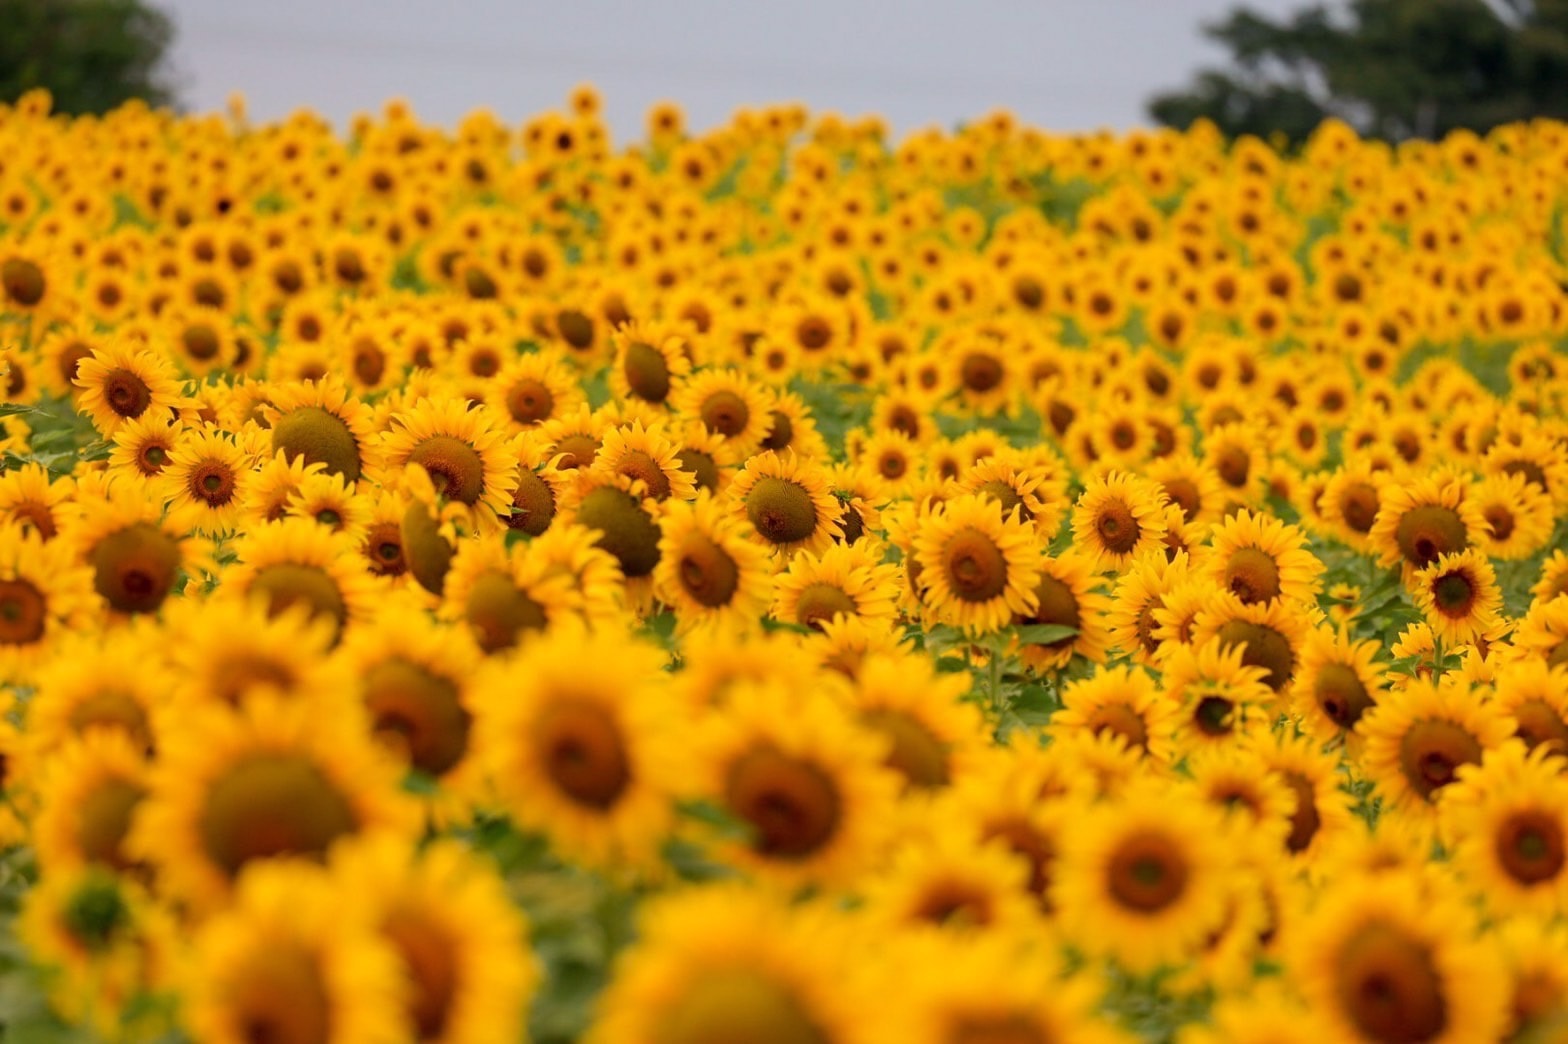 Stroll and Capture Picturesque Moments at the Sunflower Fields of Rai Manee Sorn